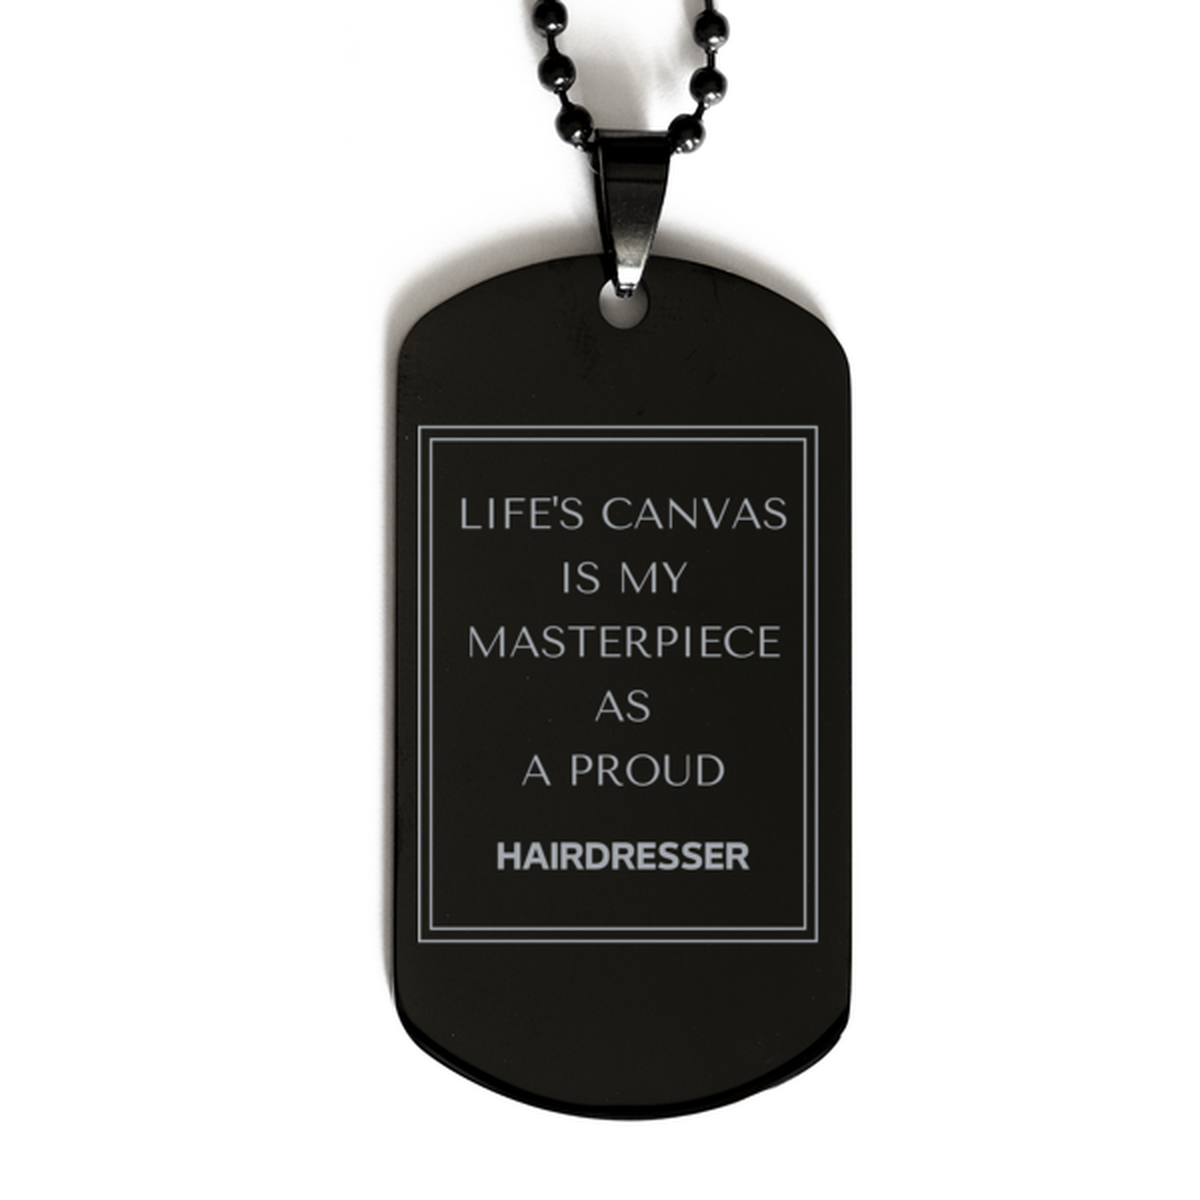 Proud Hairdresser Gifts, Life's canvas is my masterpiece, Epic Birthday Christmas Unique Black Dog Tag For Hairdresser, Coworkers, Men, Women, Friends